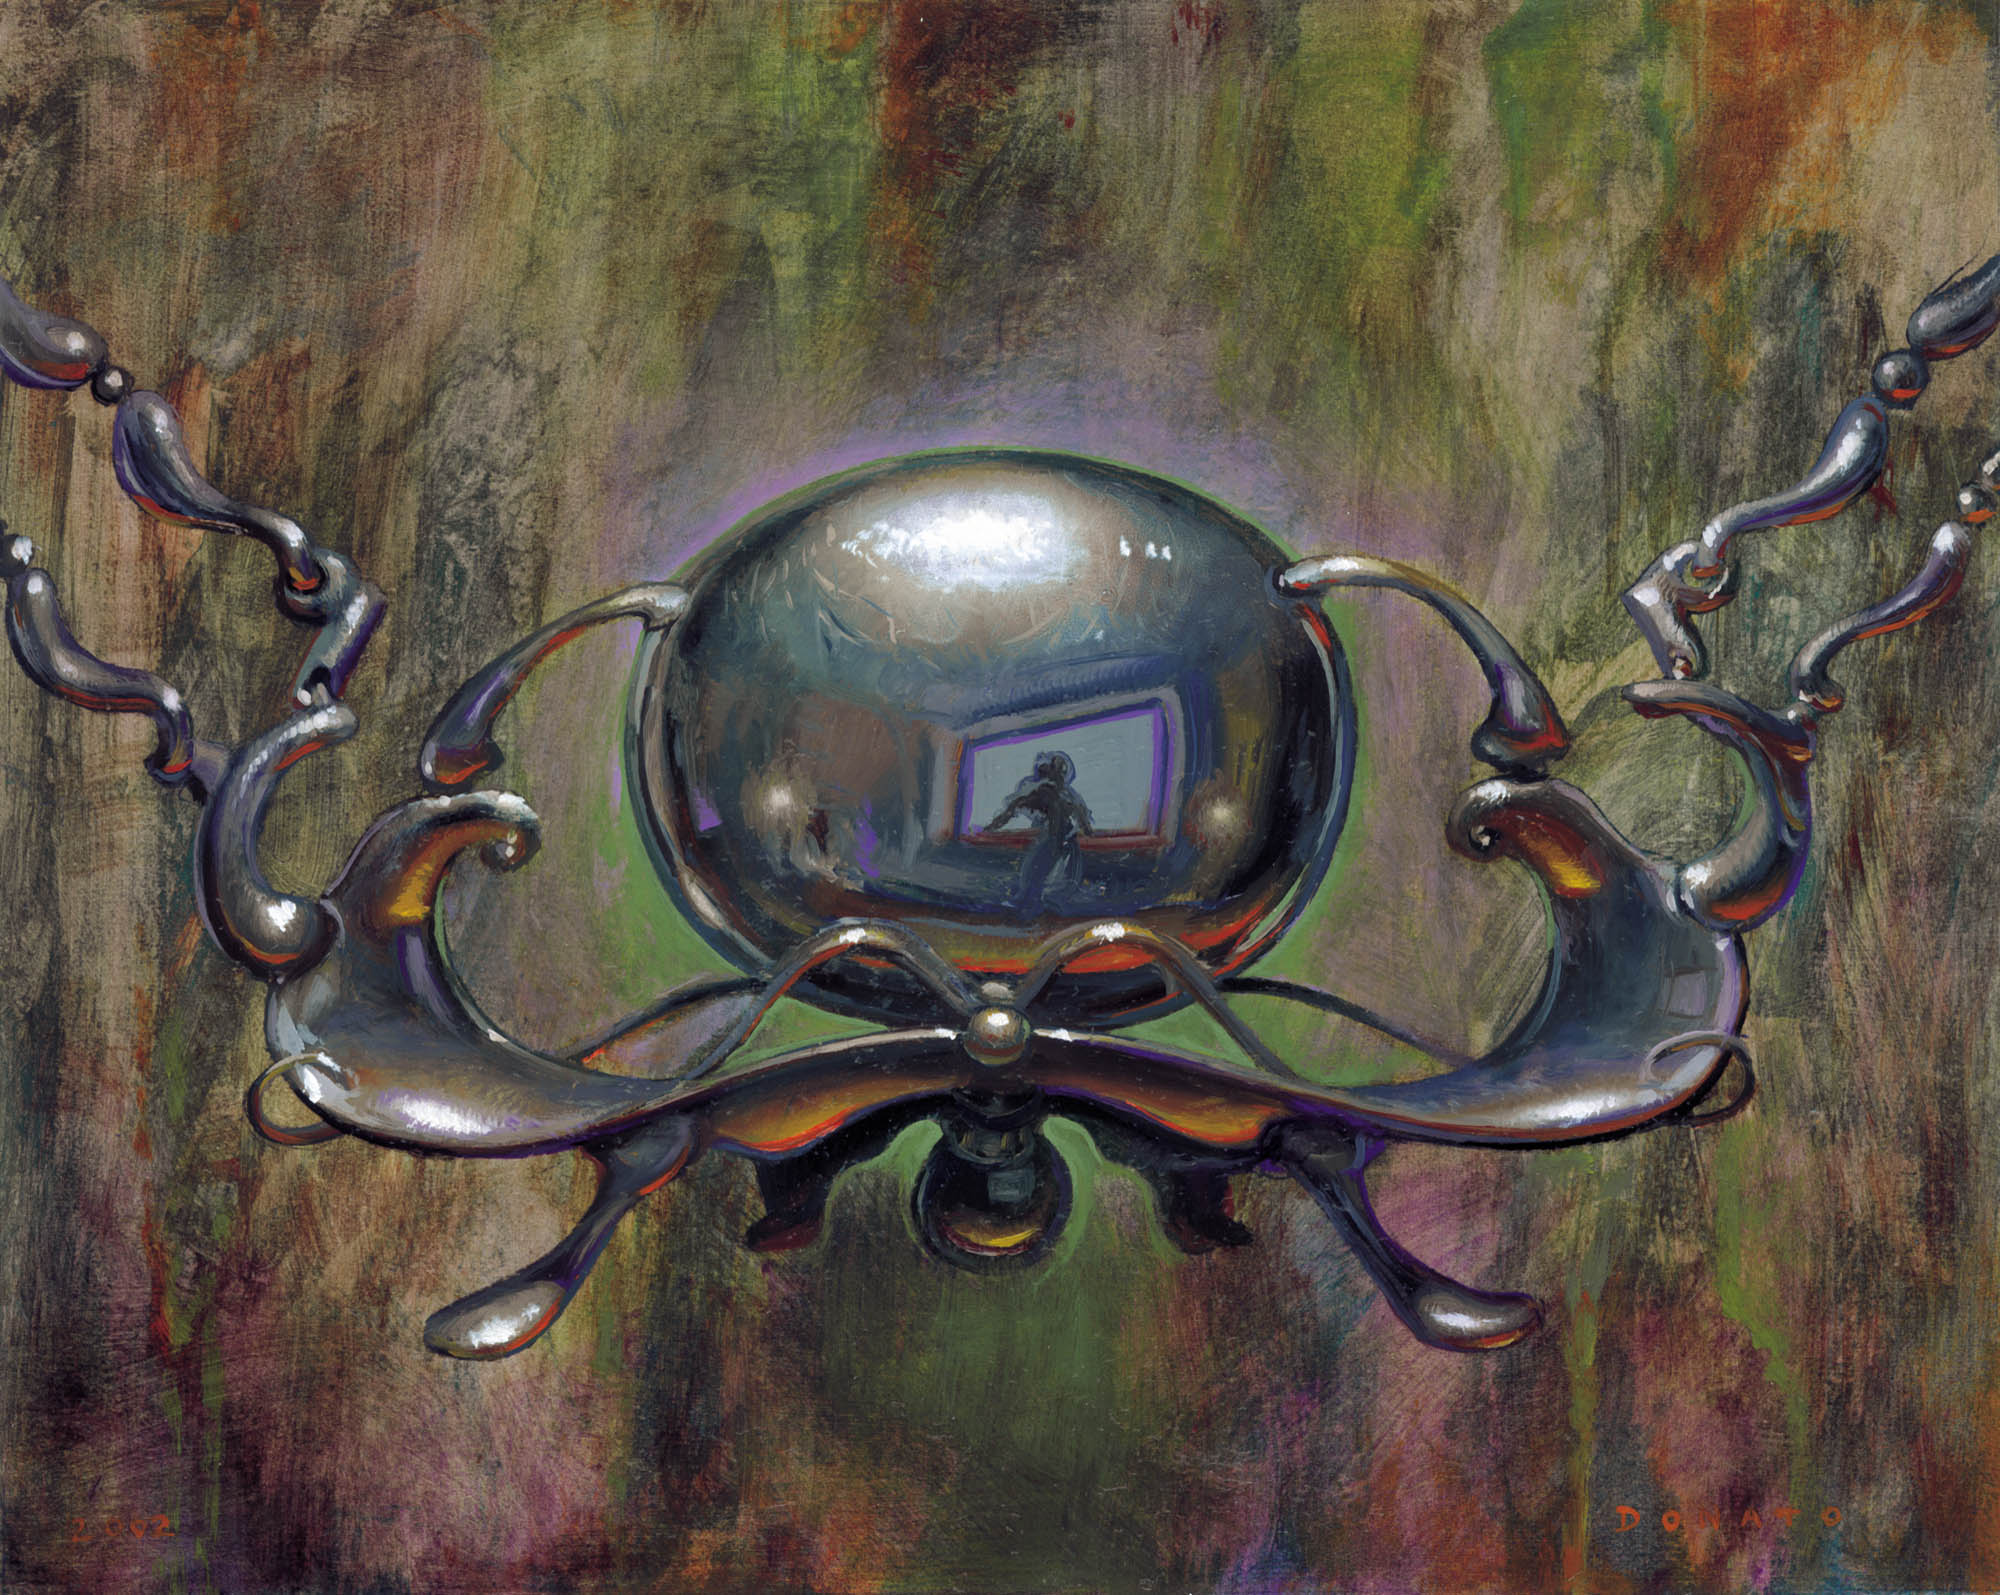 Chrome Mox
Mirrodin
10" x 13"  Oil on Panel 2000
private collection
prints available in the store